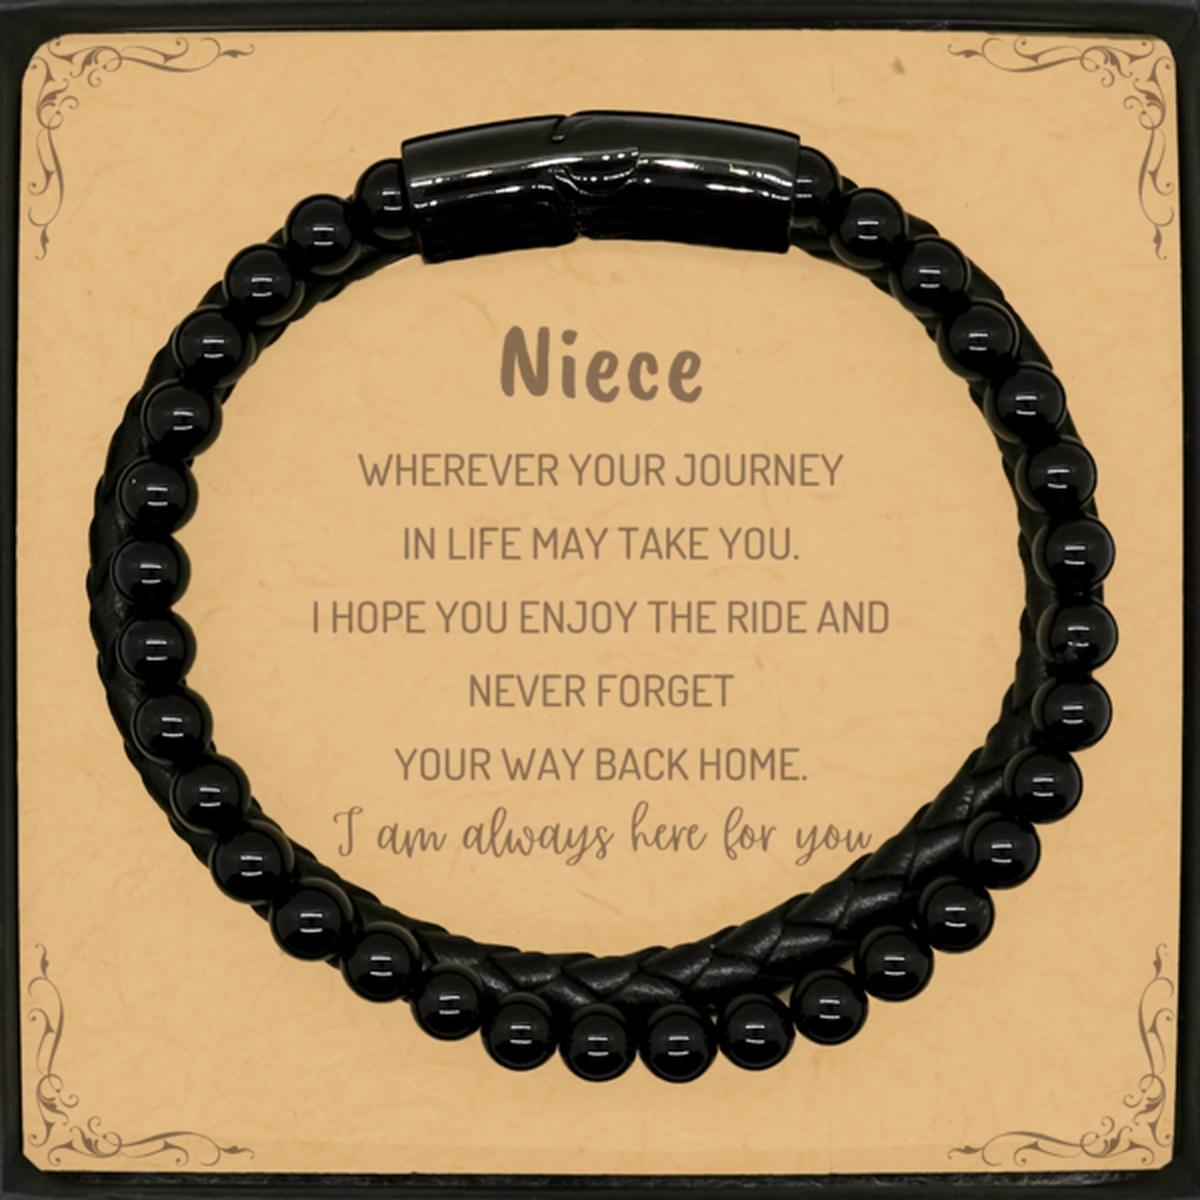 Niece wherever your journey in life may take you, I am always here for you Niece Stone Leather Bracelets, Awesome Christmas Gifts For Niece Message Card, Niece Birthday Gifts for Men Women Family Loved One